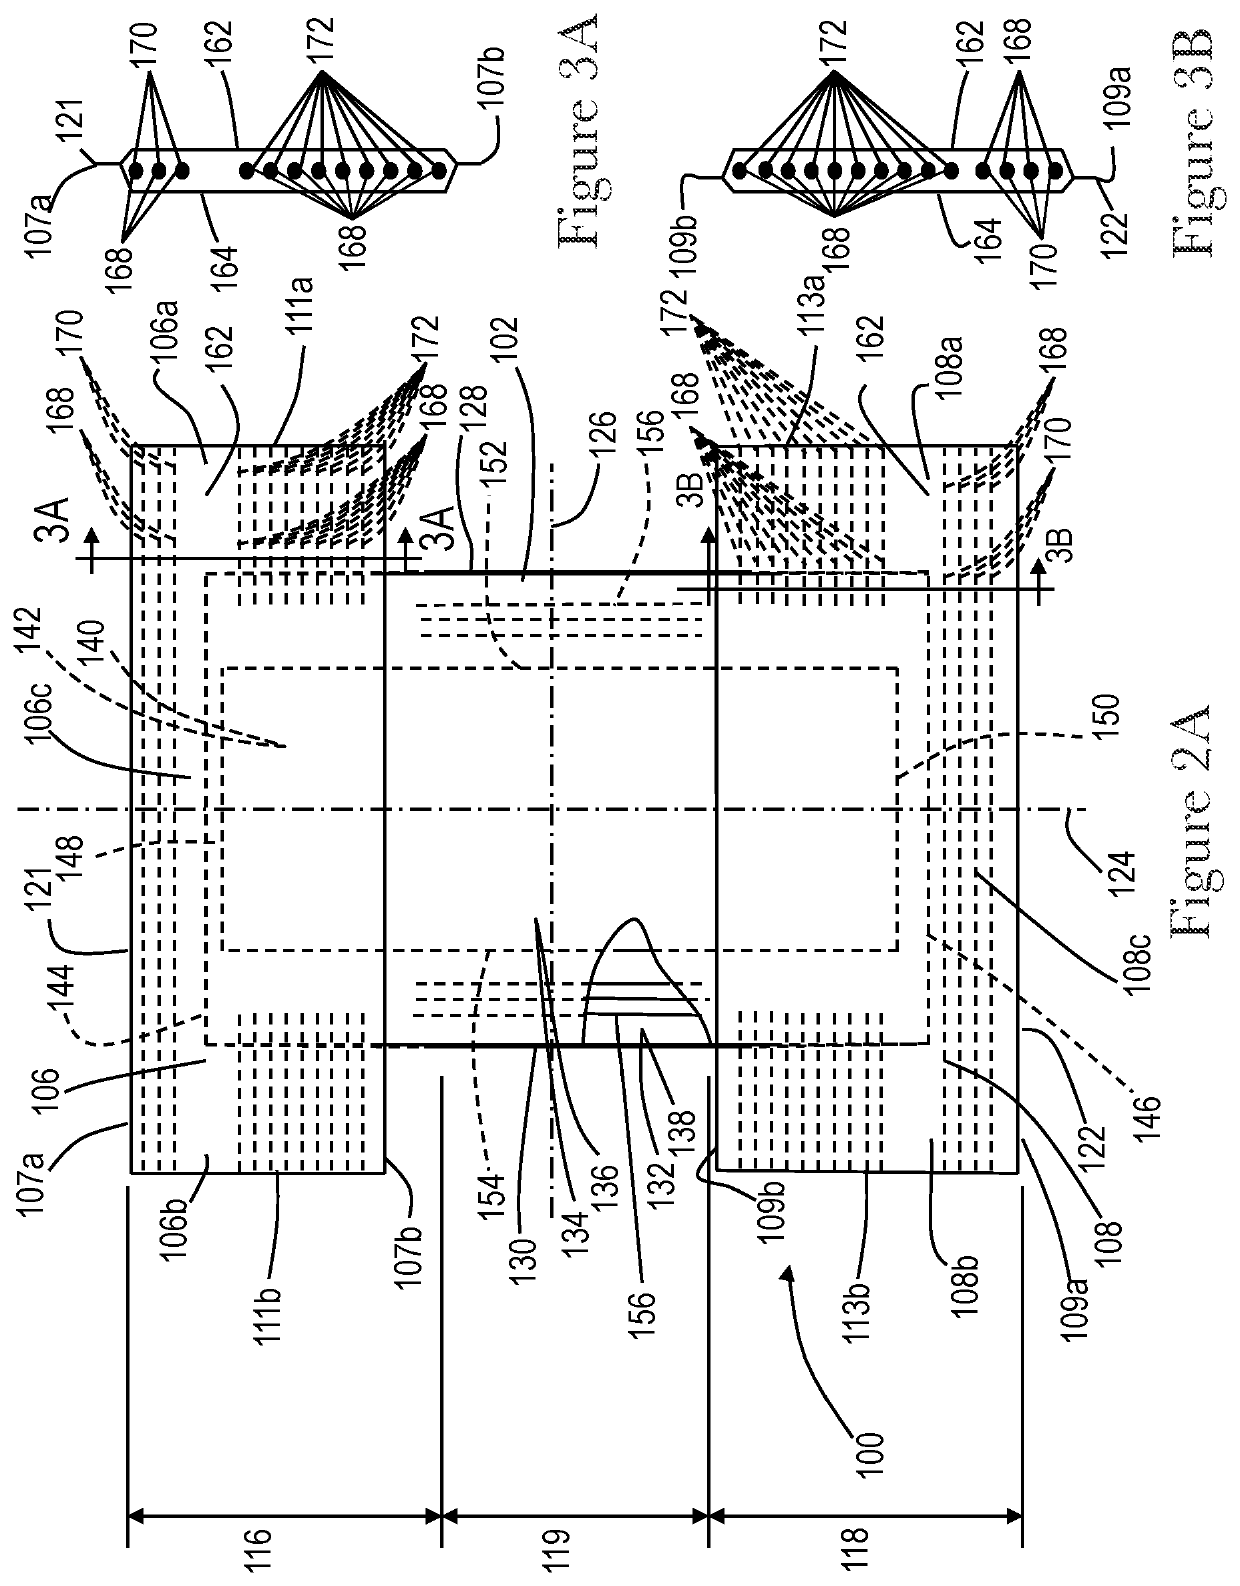 Apparatuses and methods for making absorbent articles with low intensity side seam regions